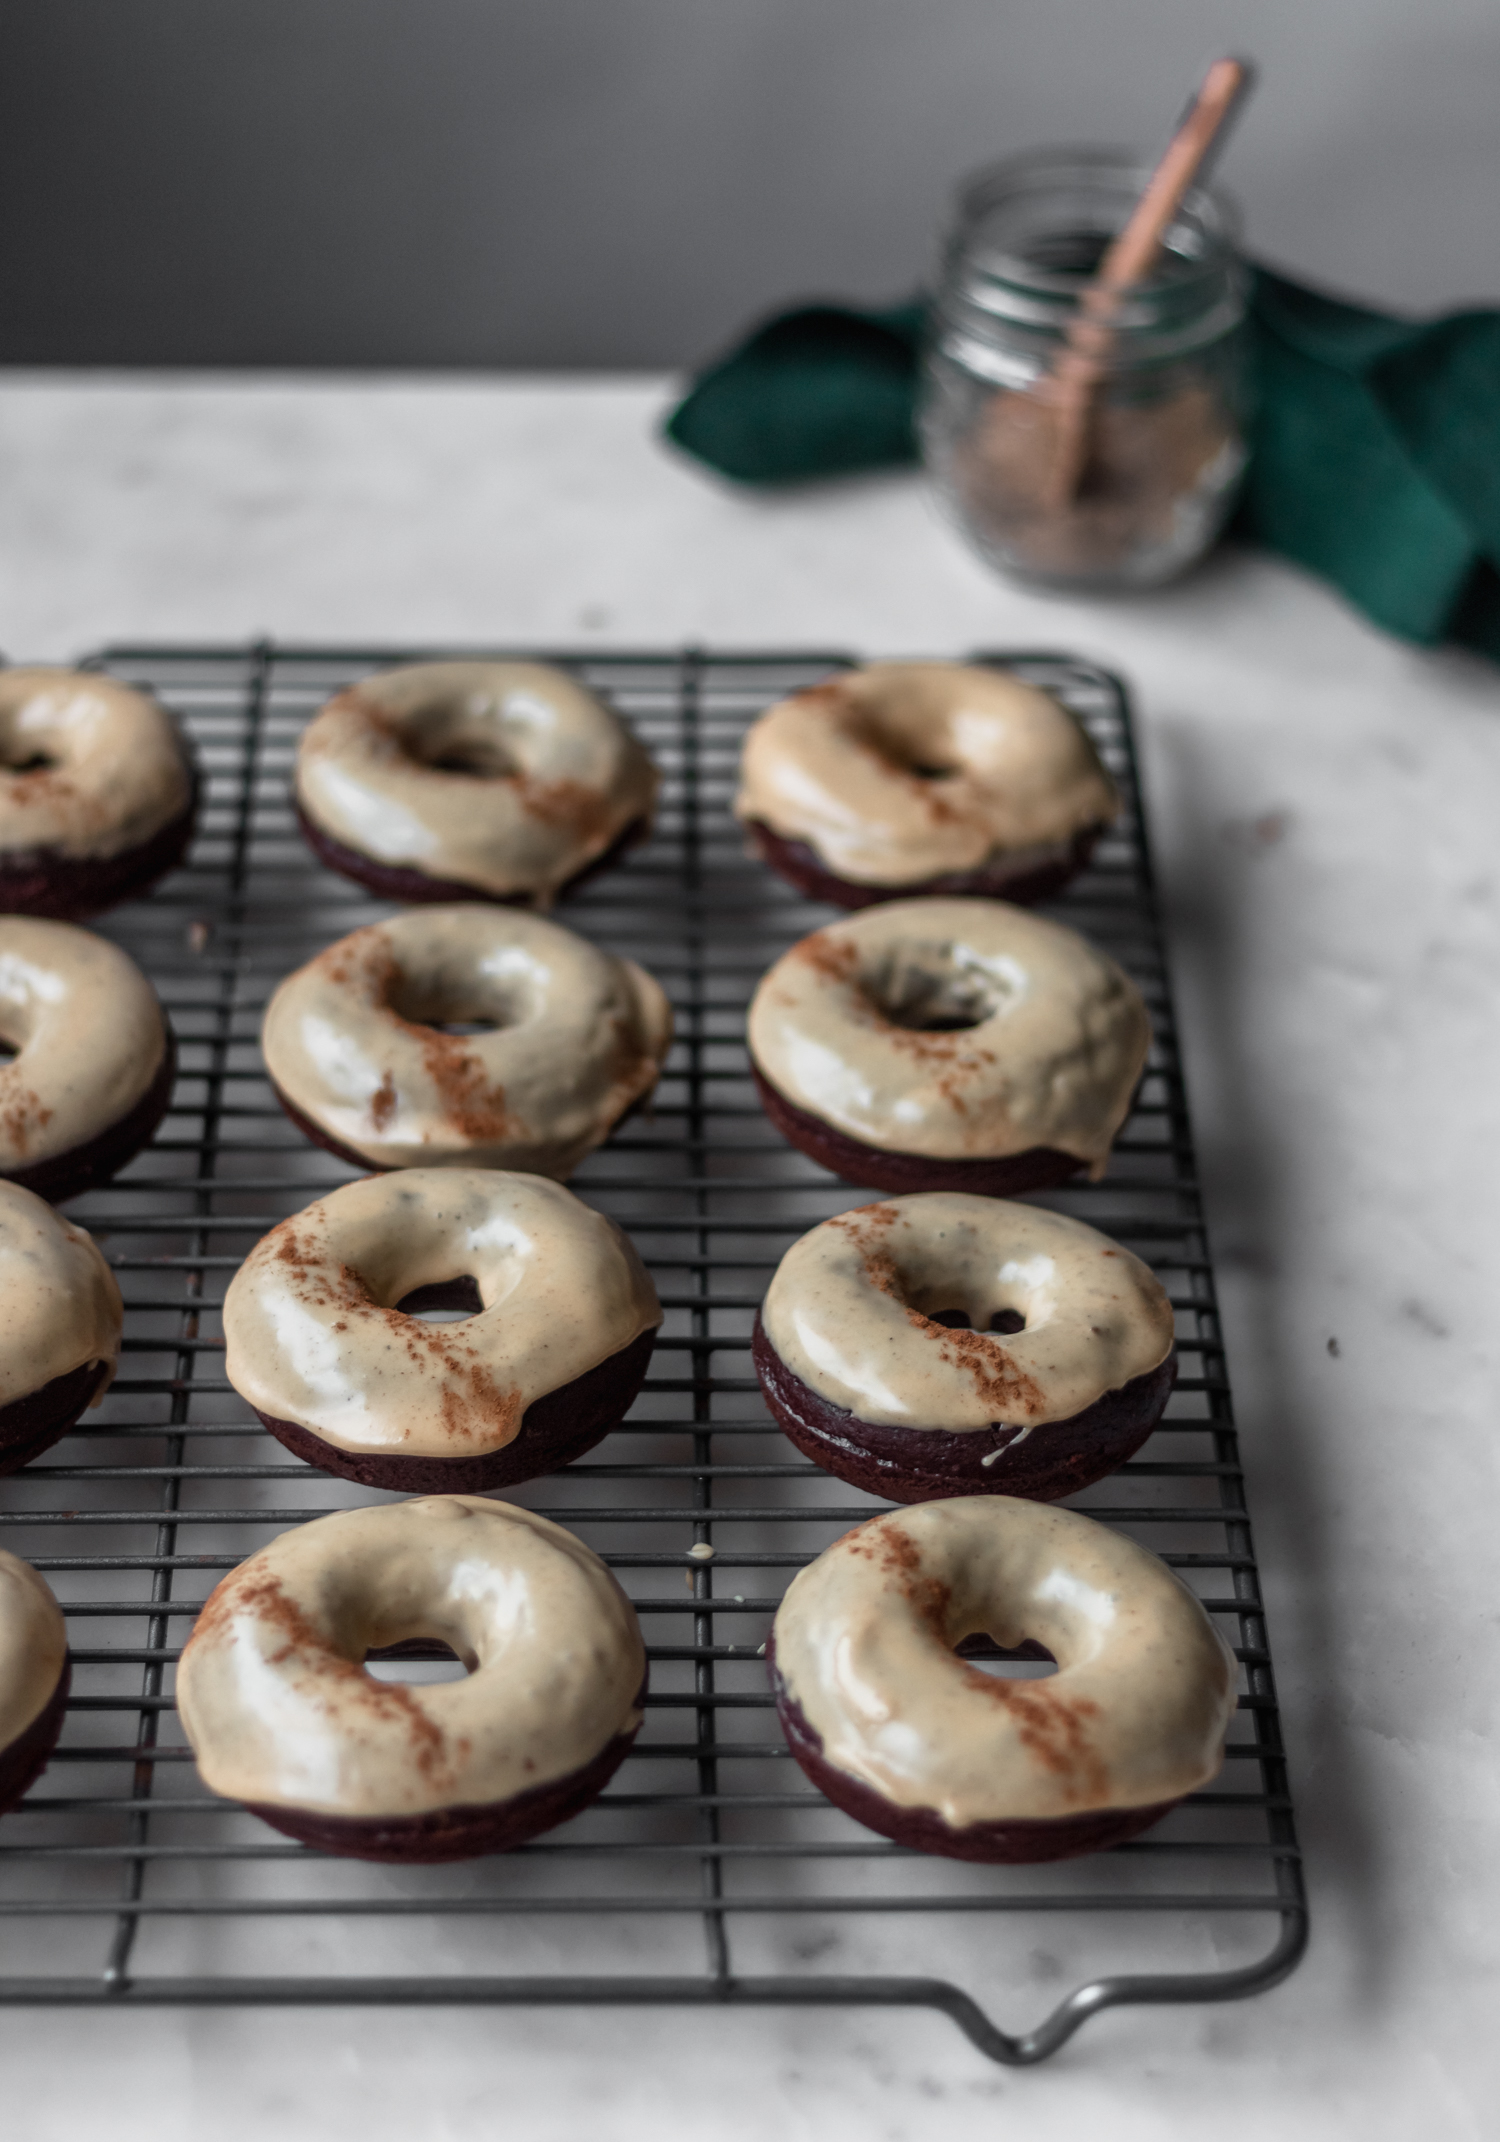 Rows of baked chocolate donuts on a cooling rack on a marble counter with spices and a green linen in the background.